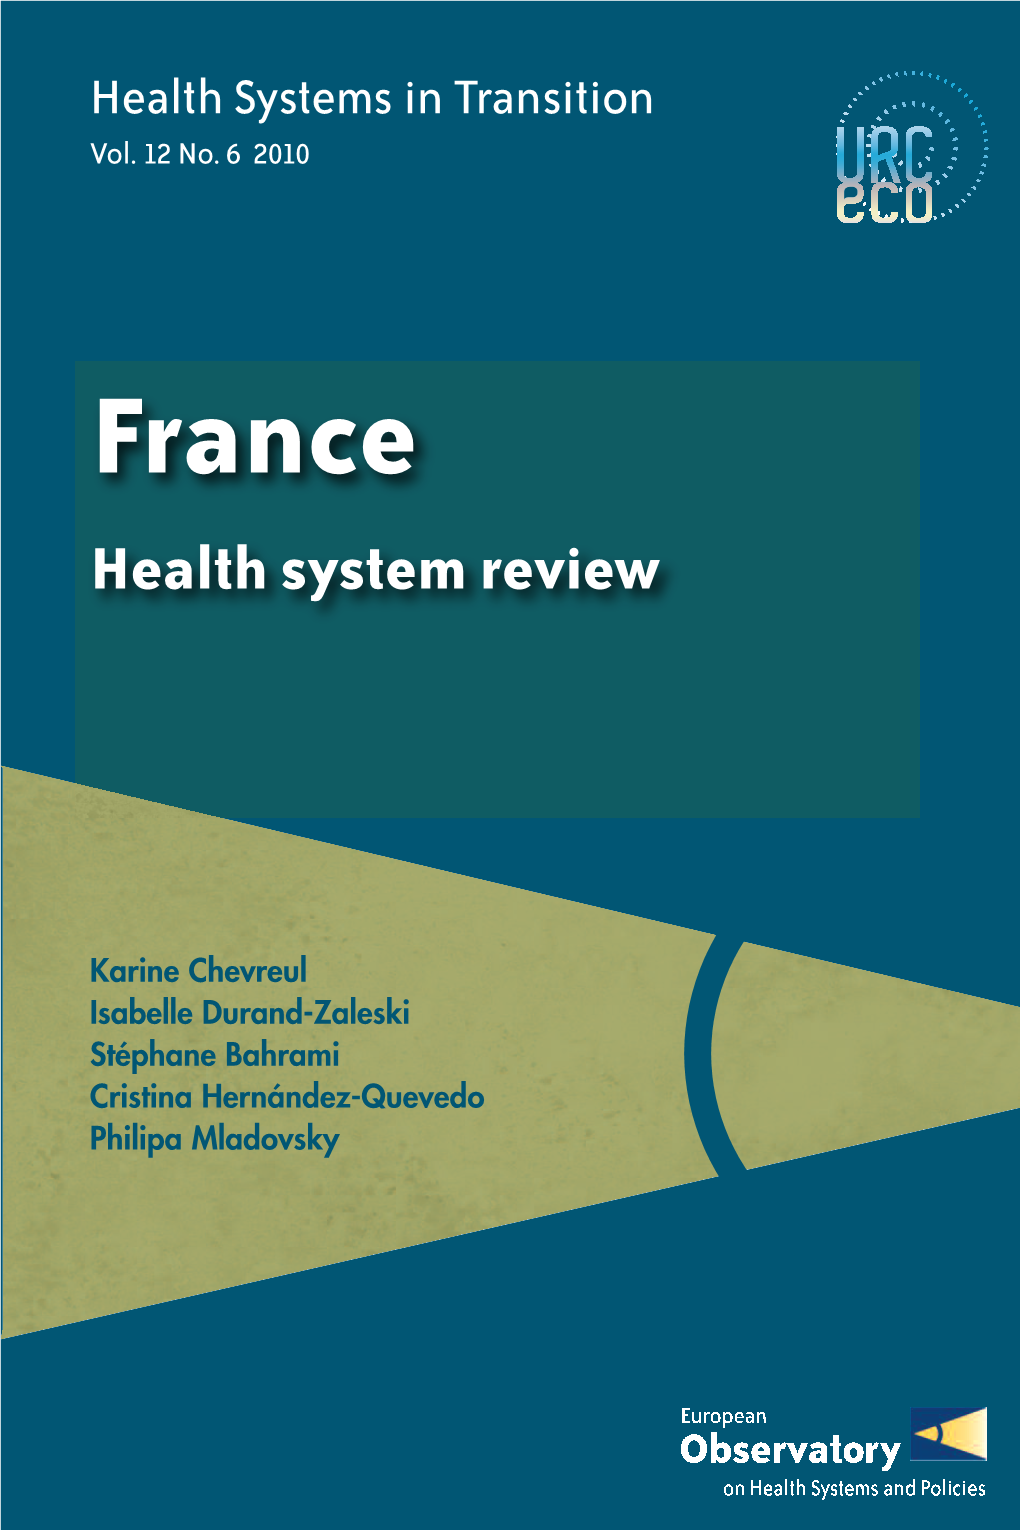 Health Systems in Transition / France, Vol.12, No.6, 2010